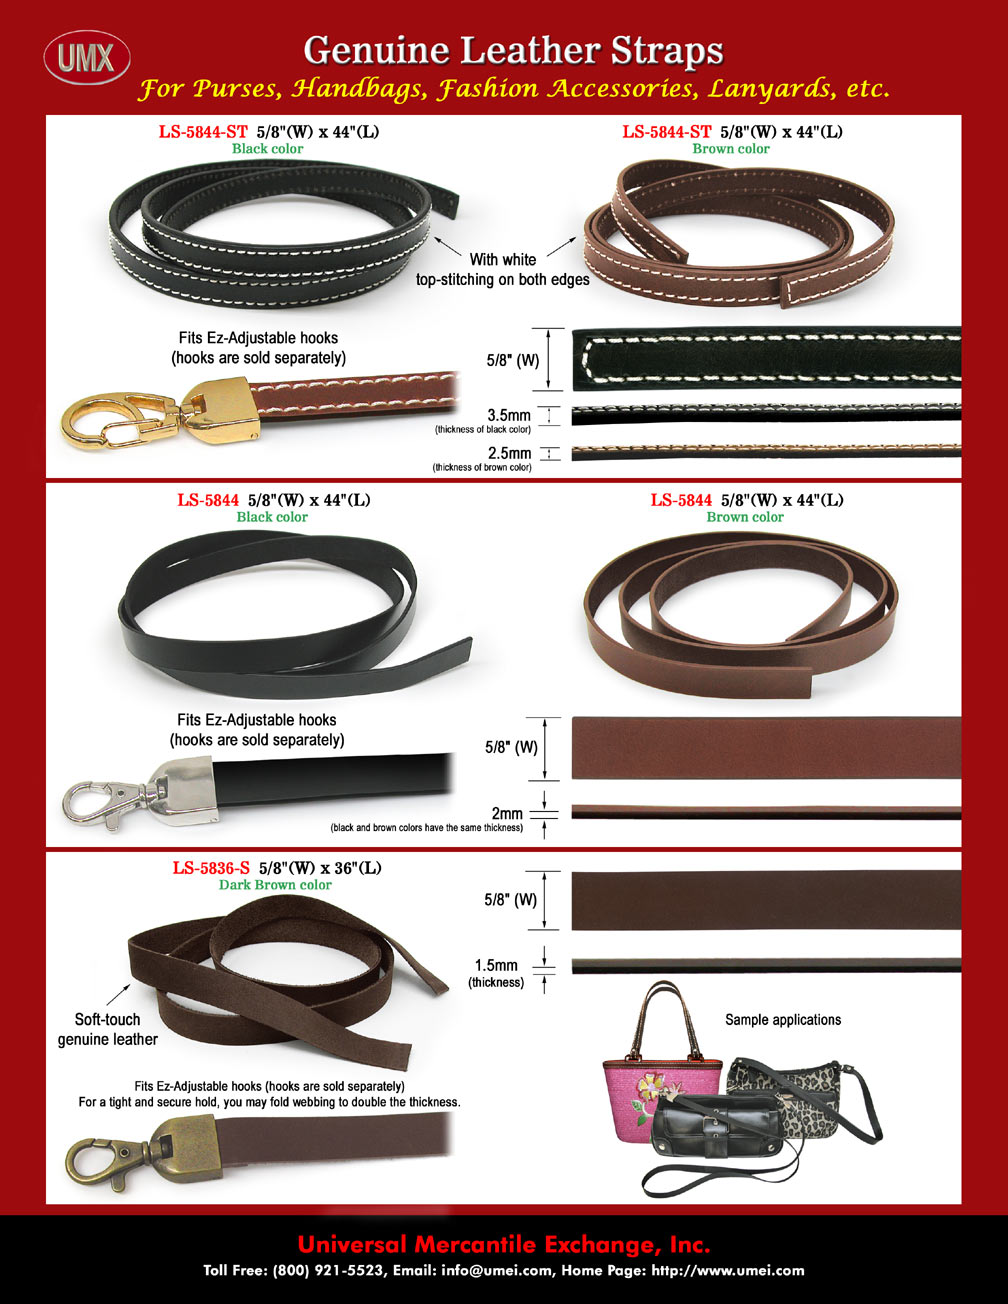 Genuine Leather Lanyard Straps For Leather Crafts Making